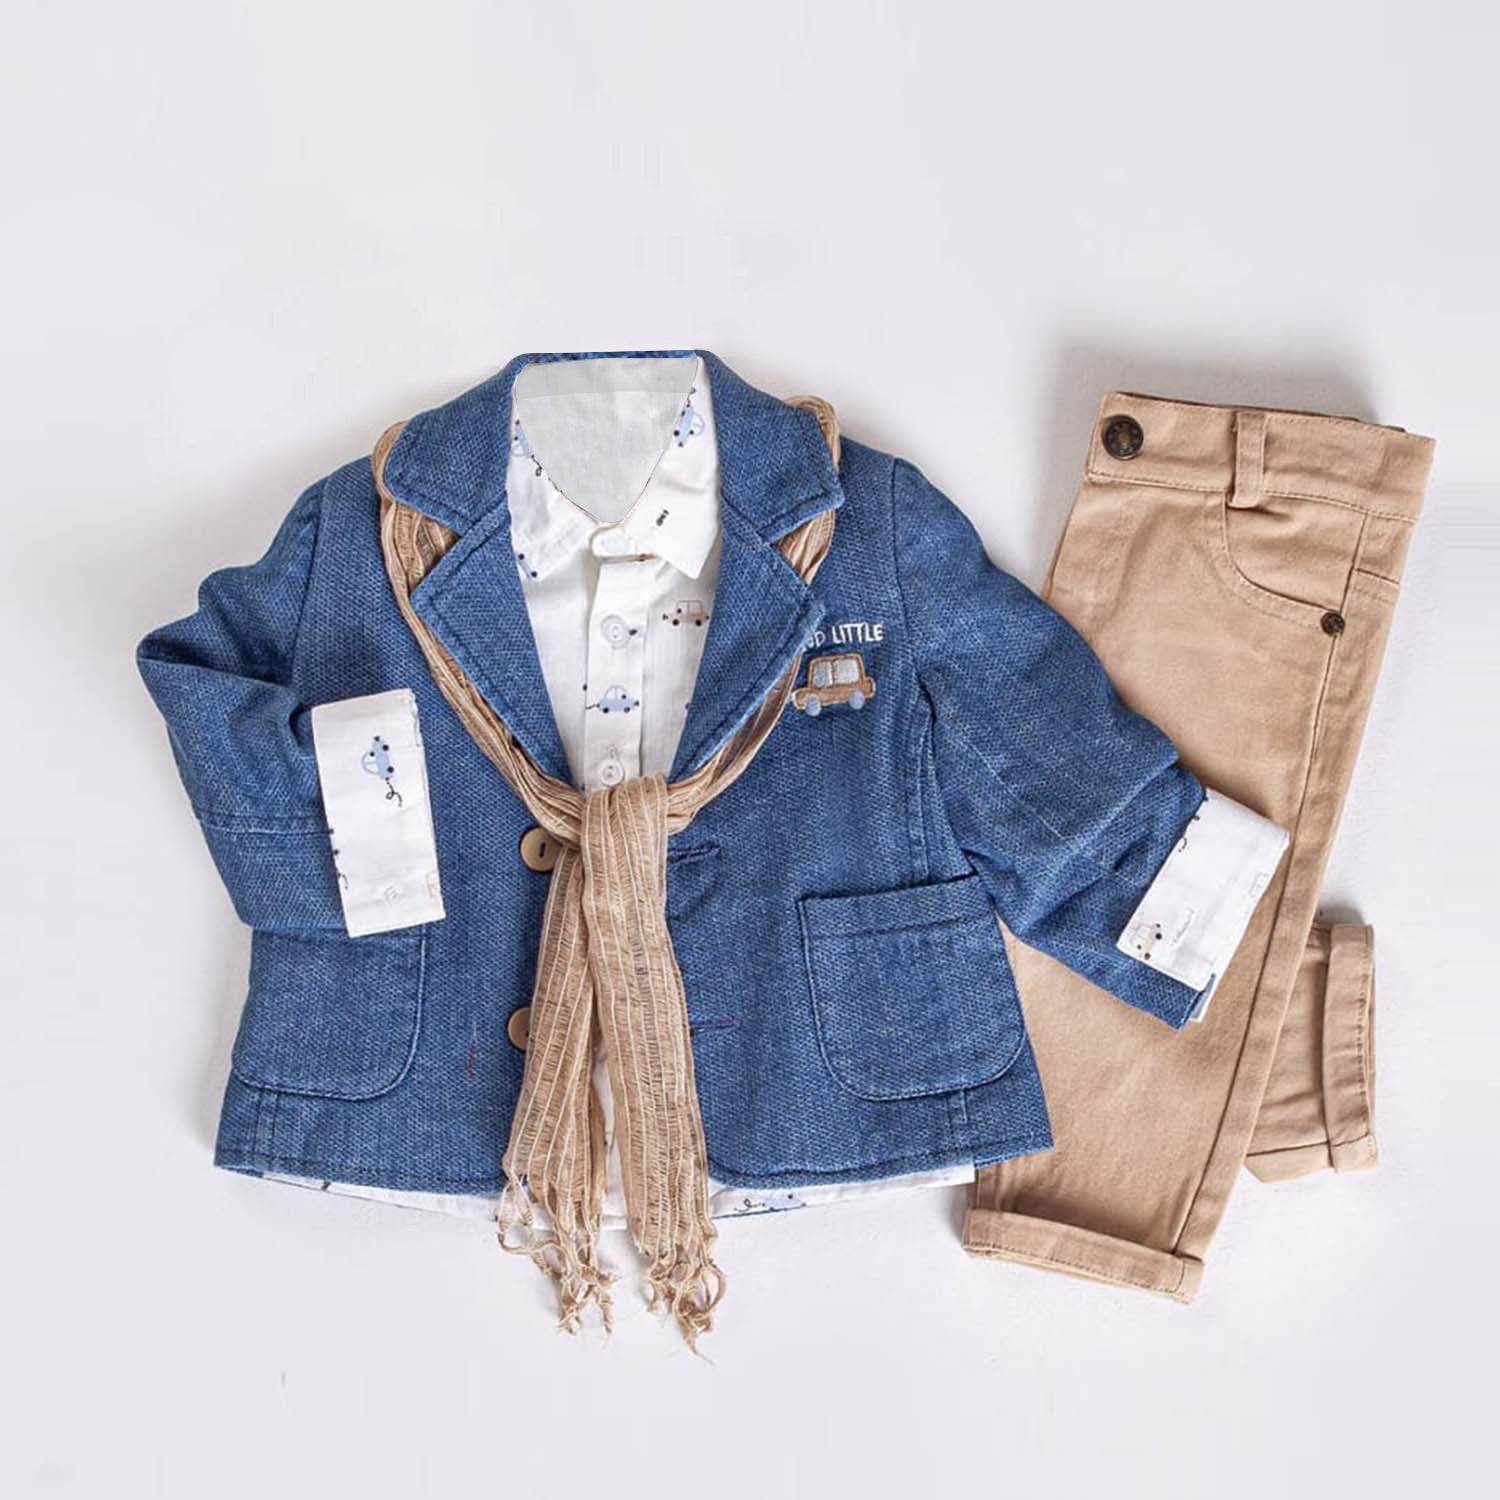 Infant and Toddler Girls' Adorable Blue Jean Jacket, Button-Up Shirt and Pants 3-Piece Set